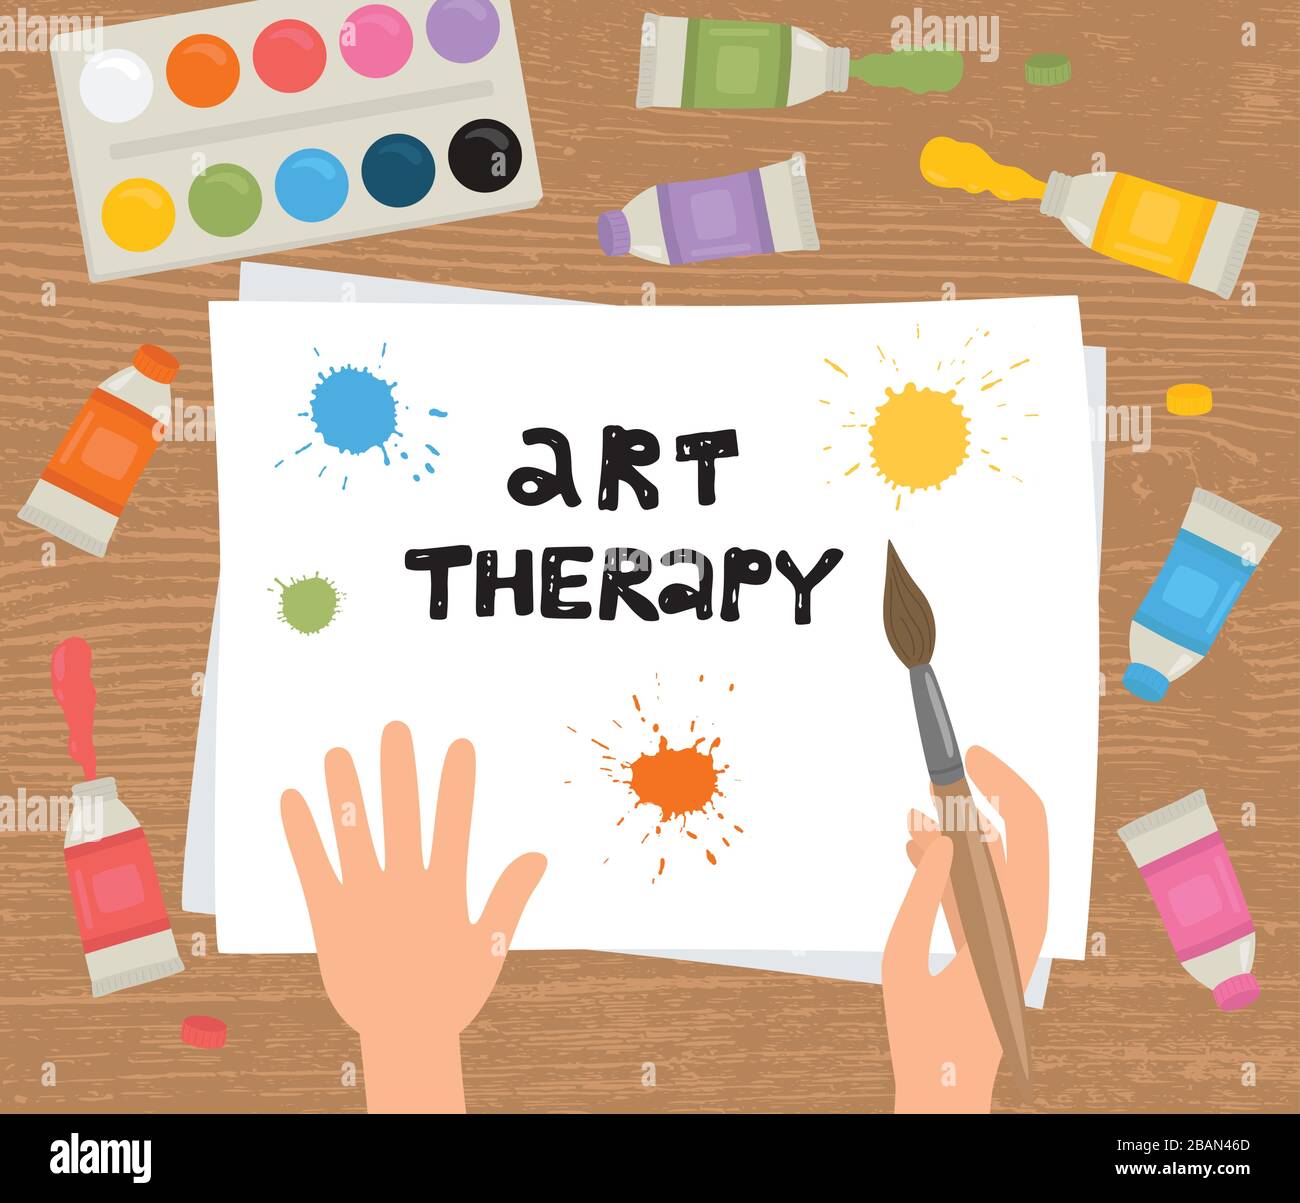 Art therapy. Hands, brush, paint, sheet of paper on a wooden background. Stock Vector